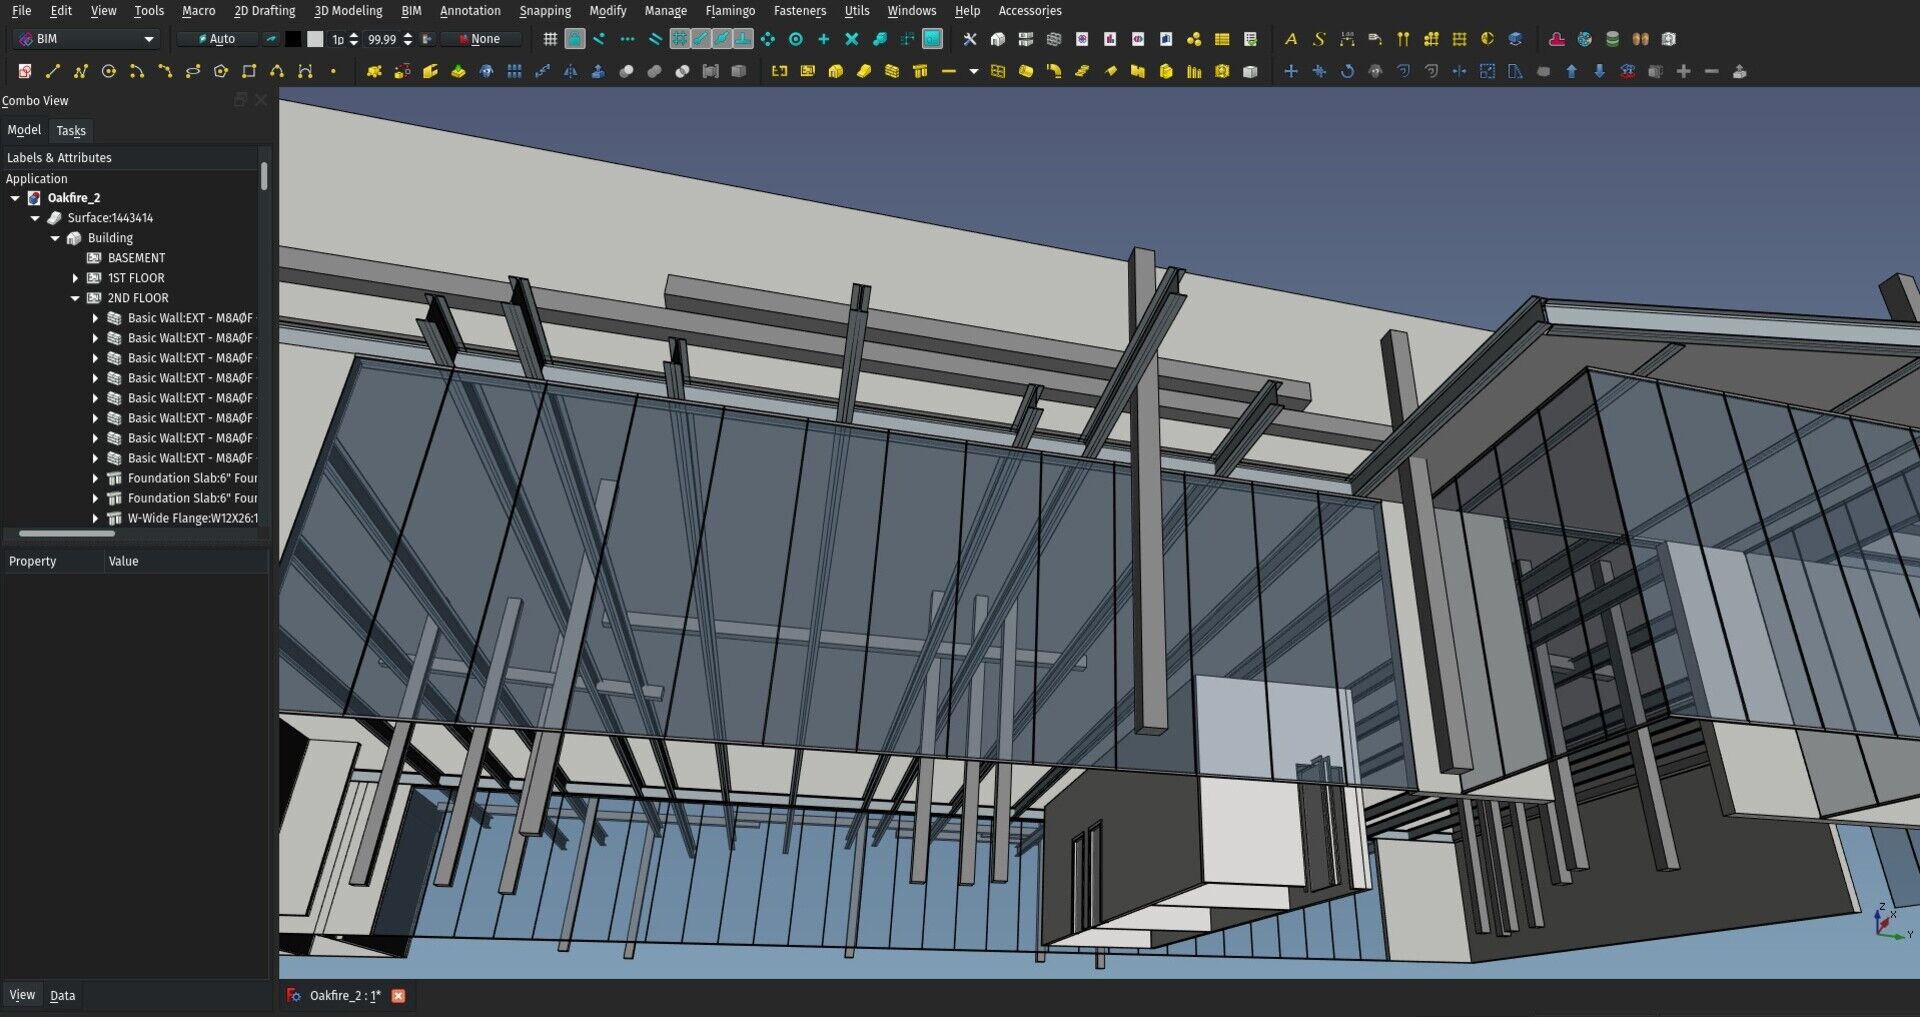 screenshot of a building in
FreeCAD